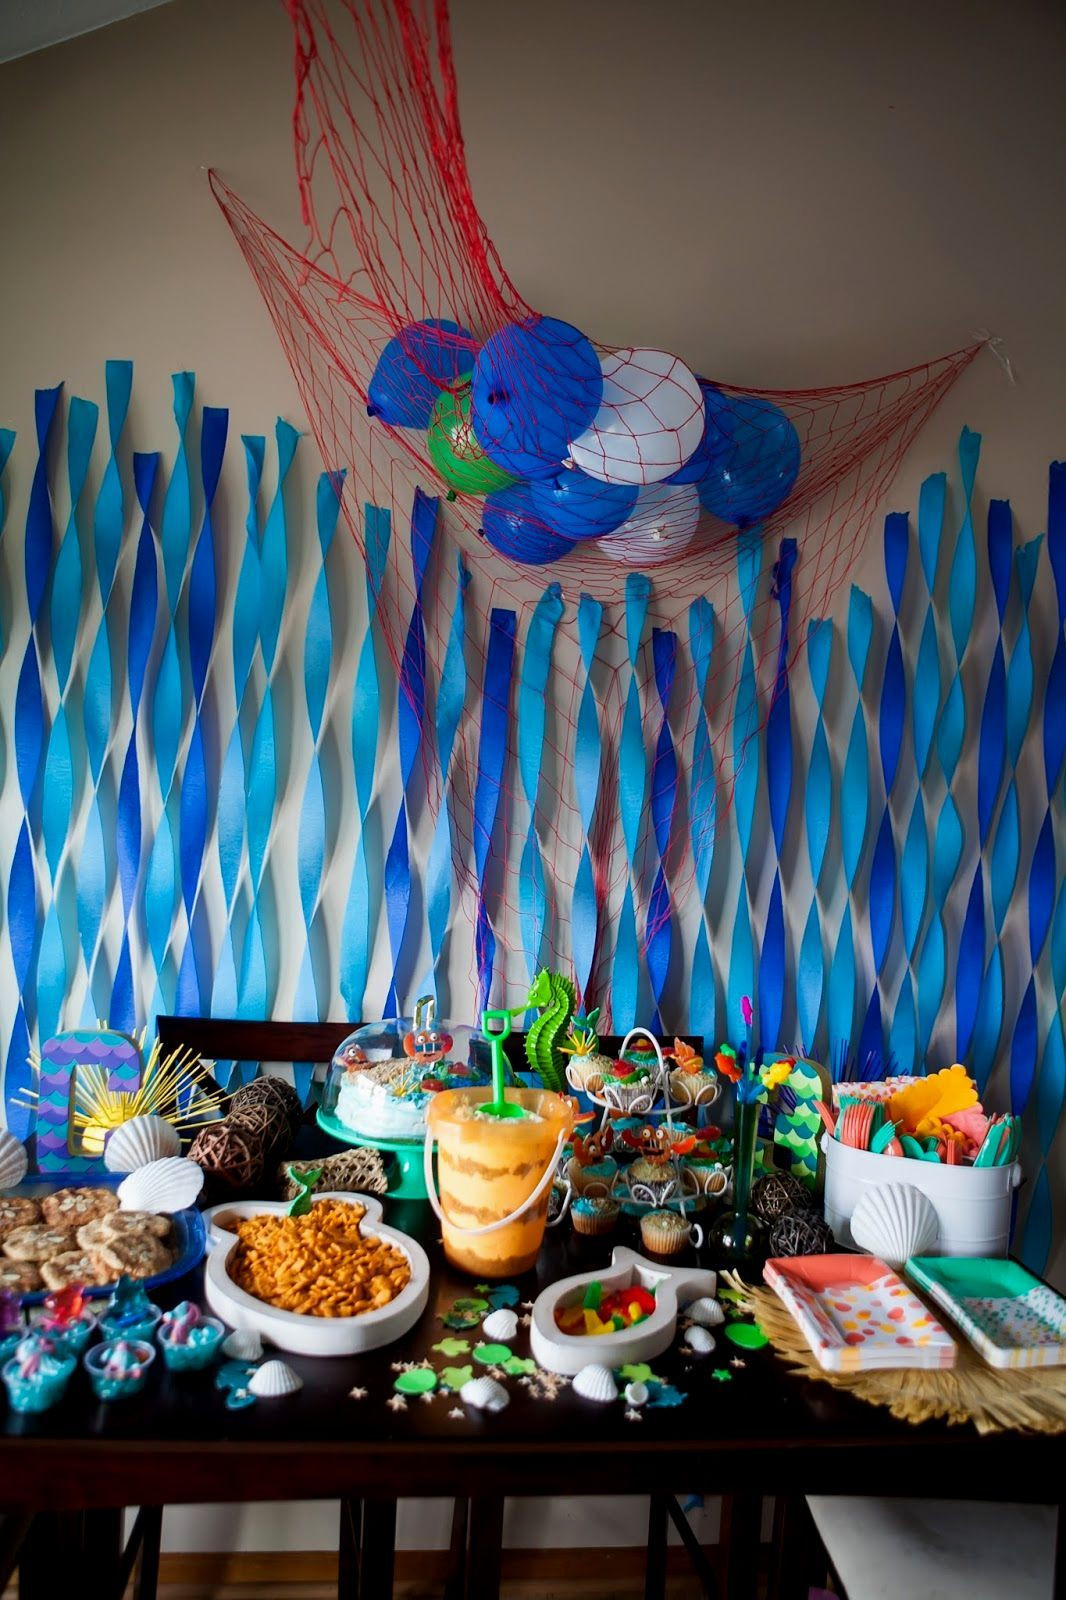 Decorating Ideas For A Beach Party
 Pin by Aero FIT4U on Beach Party decorations in 2018